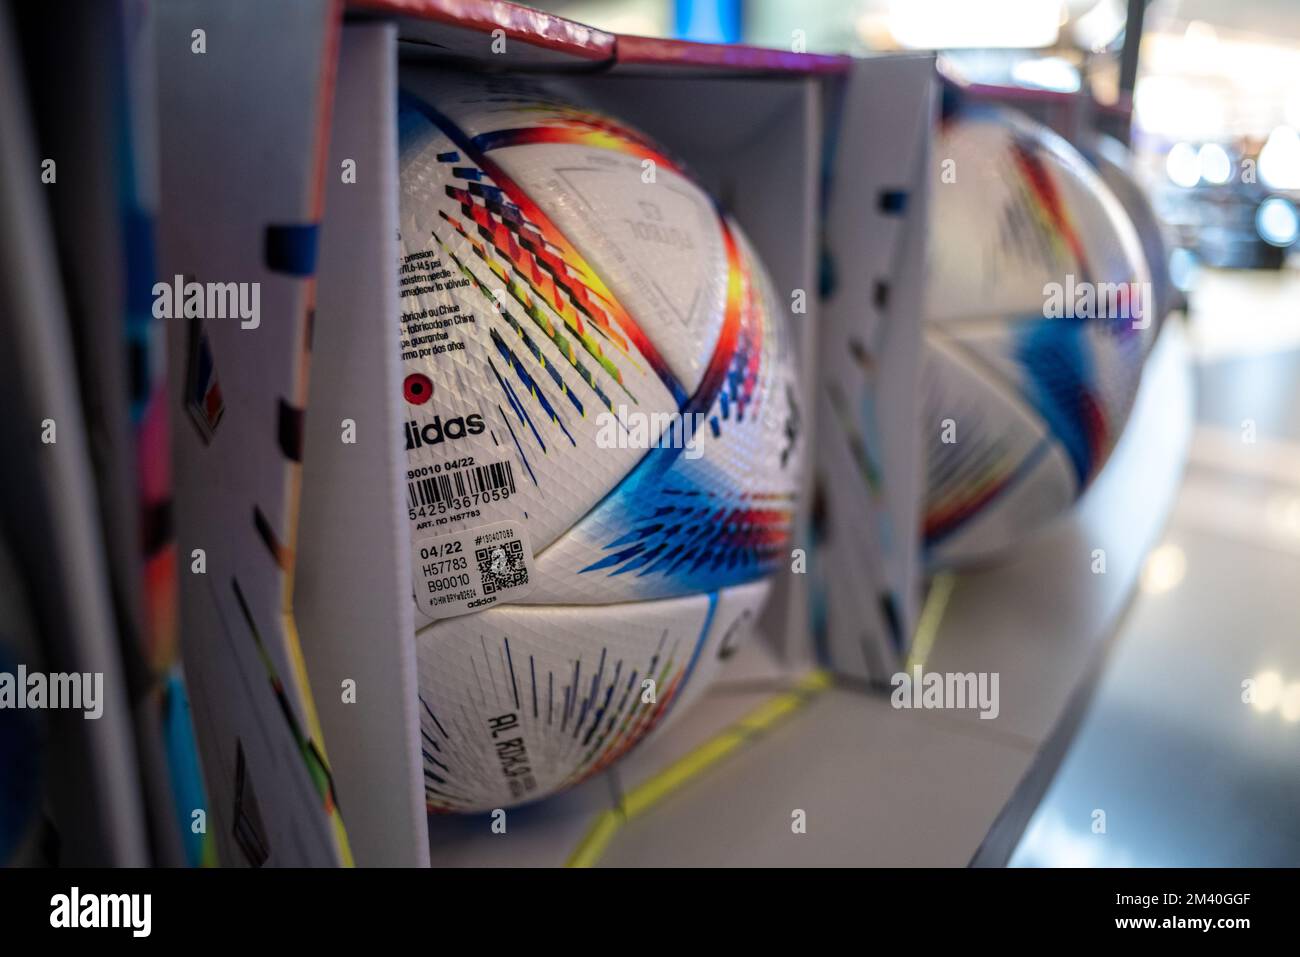 Adidas Al Rihla the official match ball of the 2022 FIFA World Cup in Qatar displayed at the Hamad International Airport in Doha, Qatar on 3 December Stock Photo